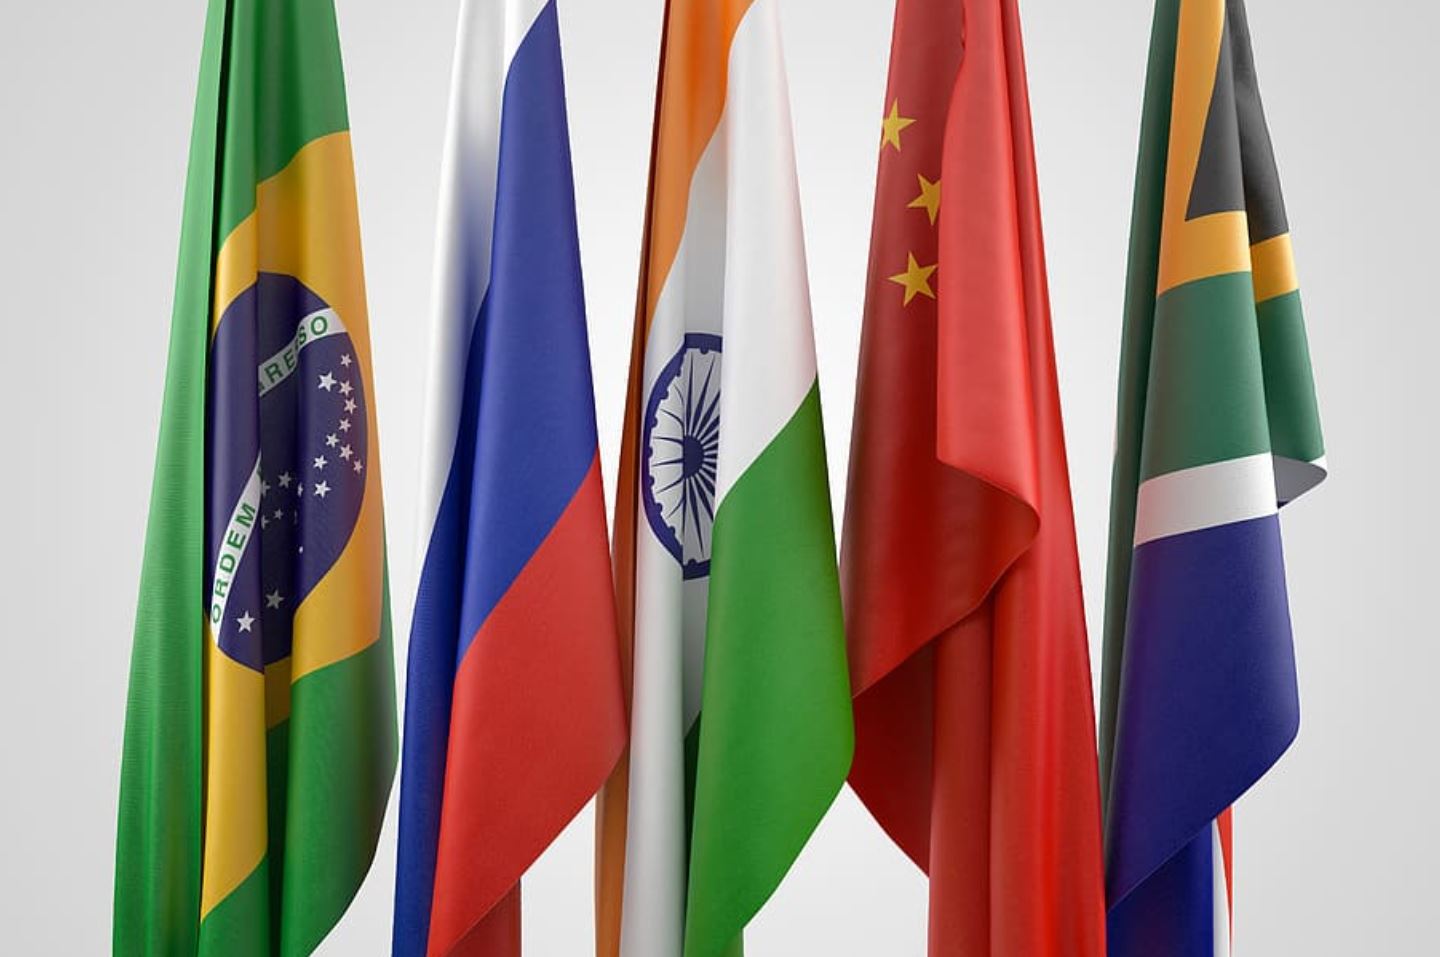 BRICS nations forge a new path with digital currency-based payment system